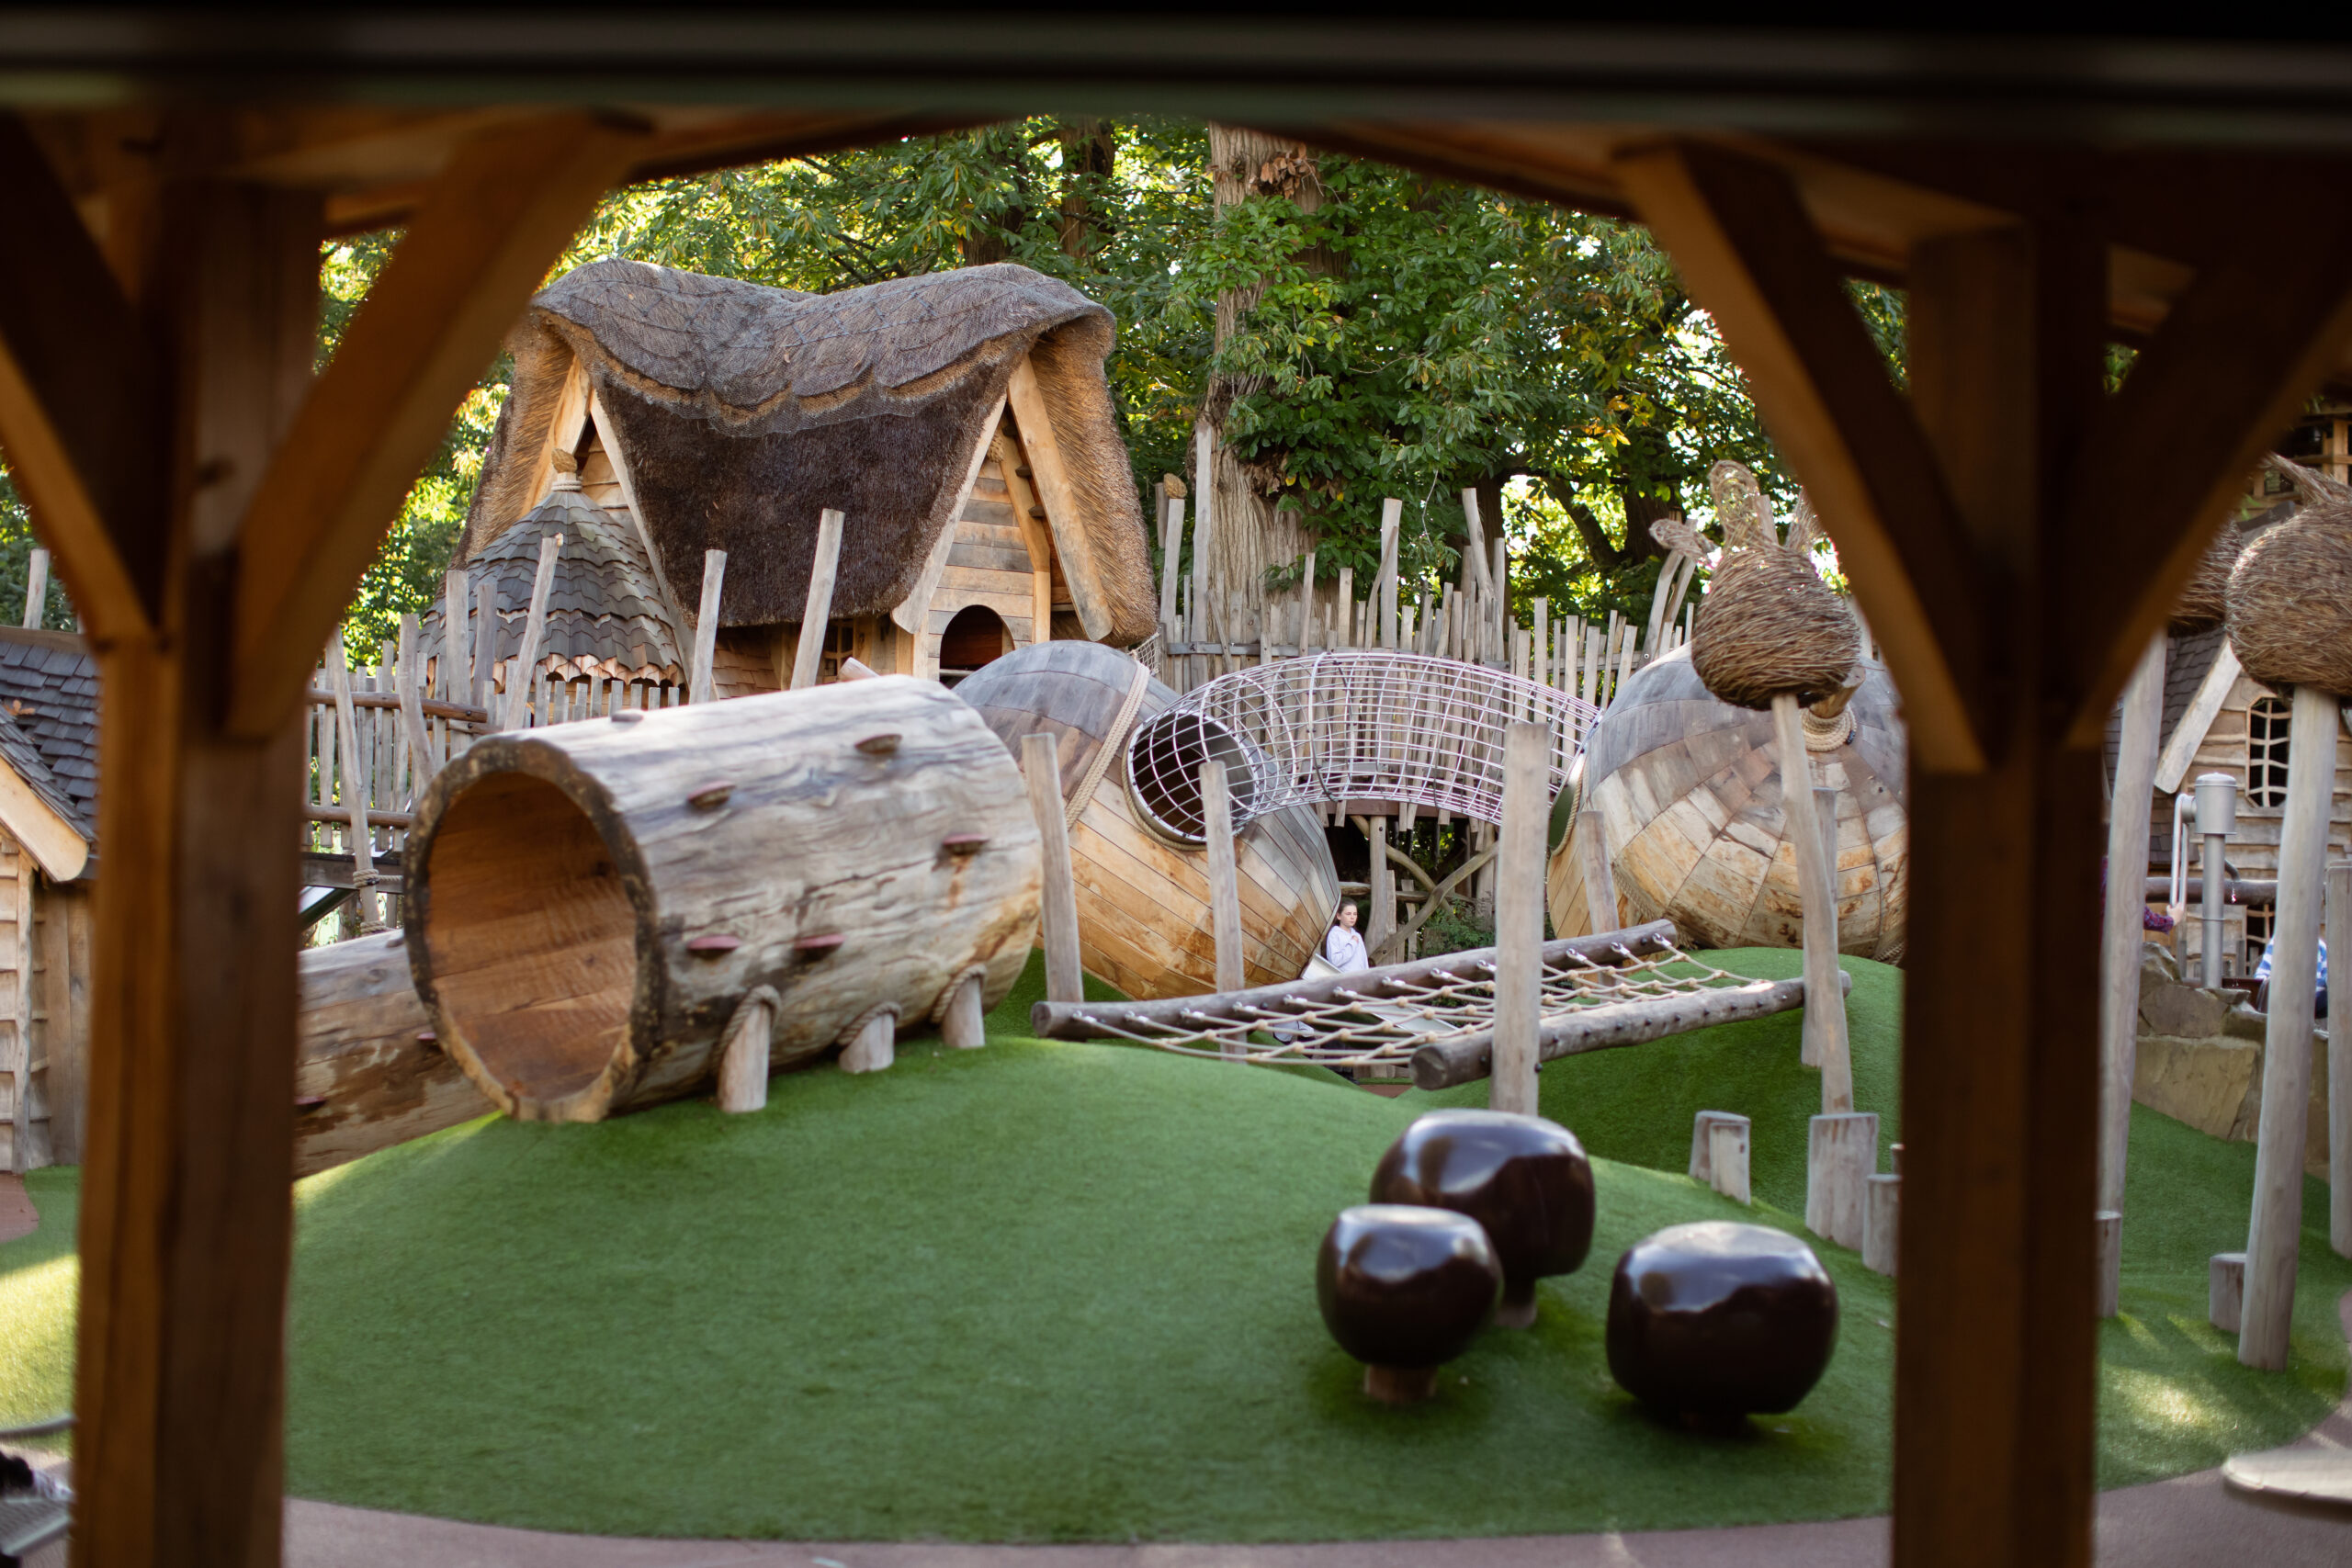 View of the Nimble area at Adventure Play through a wooden arch.